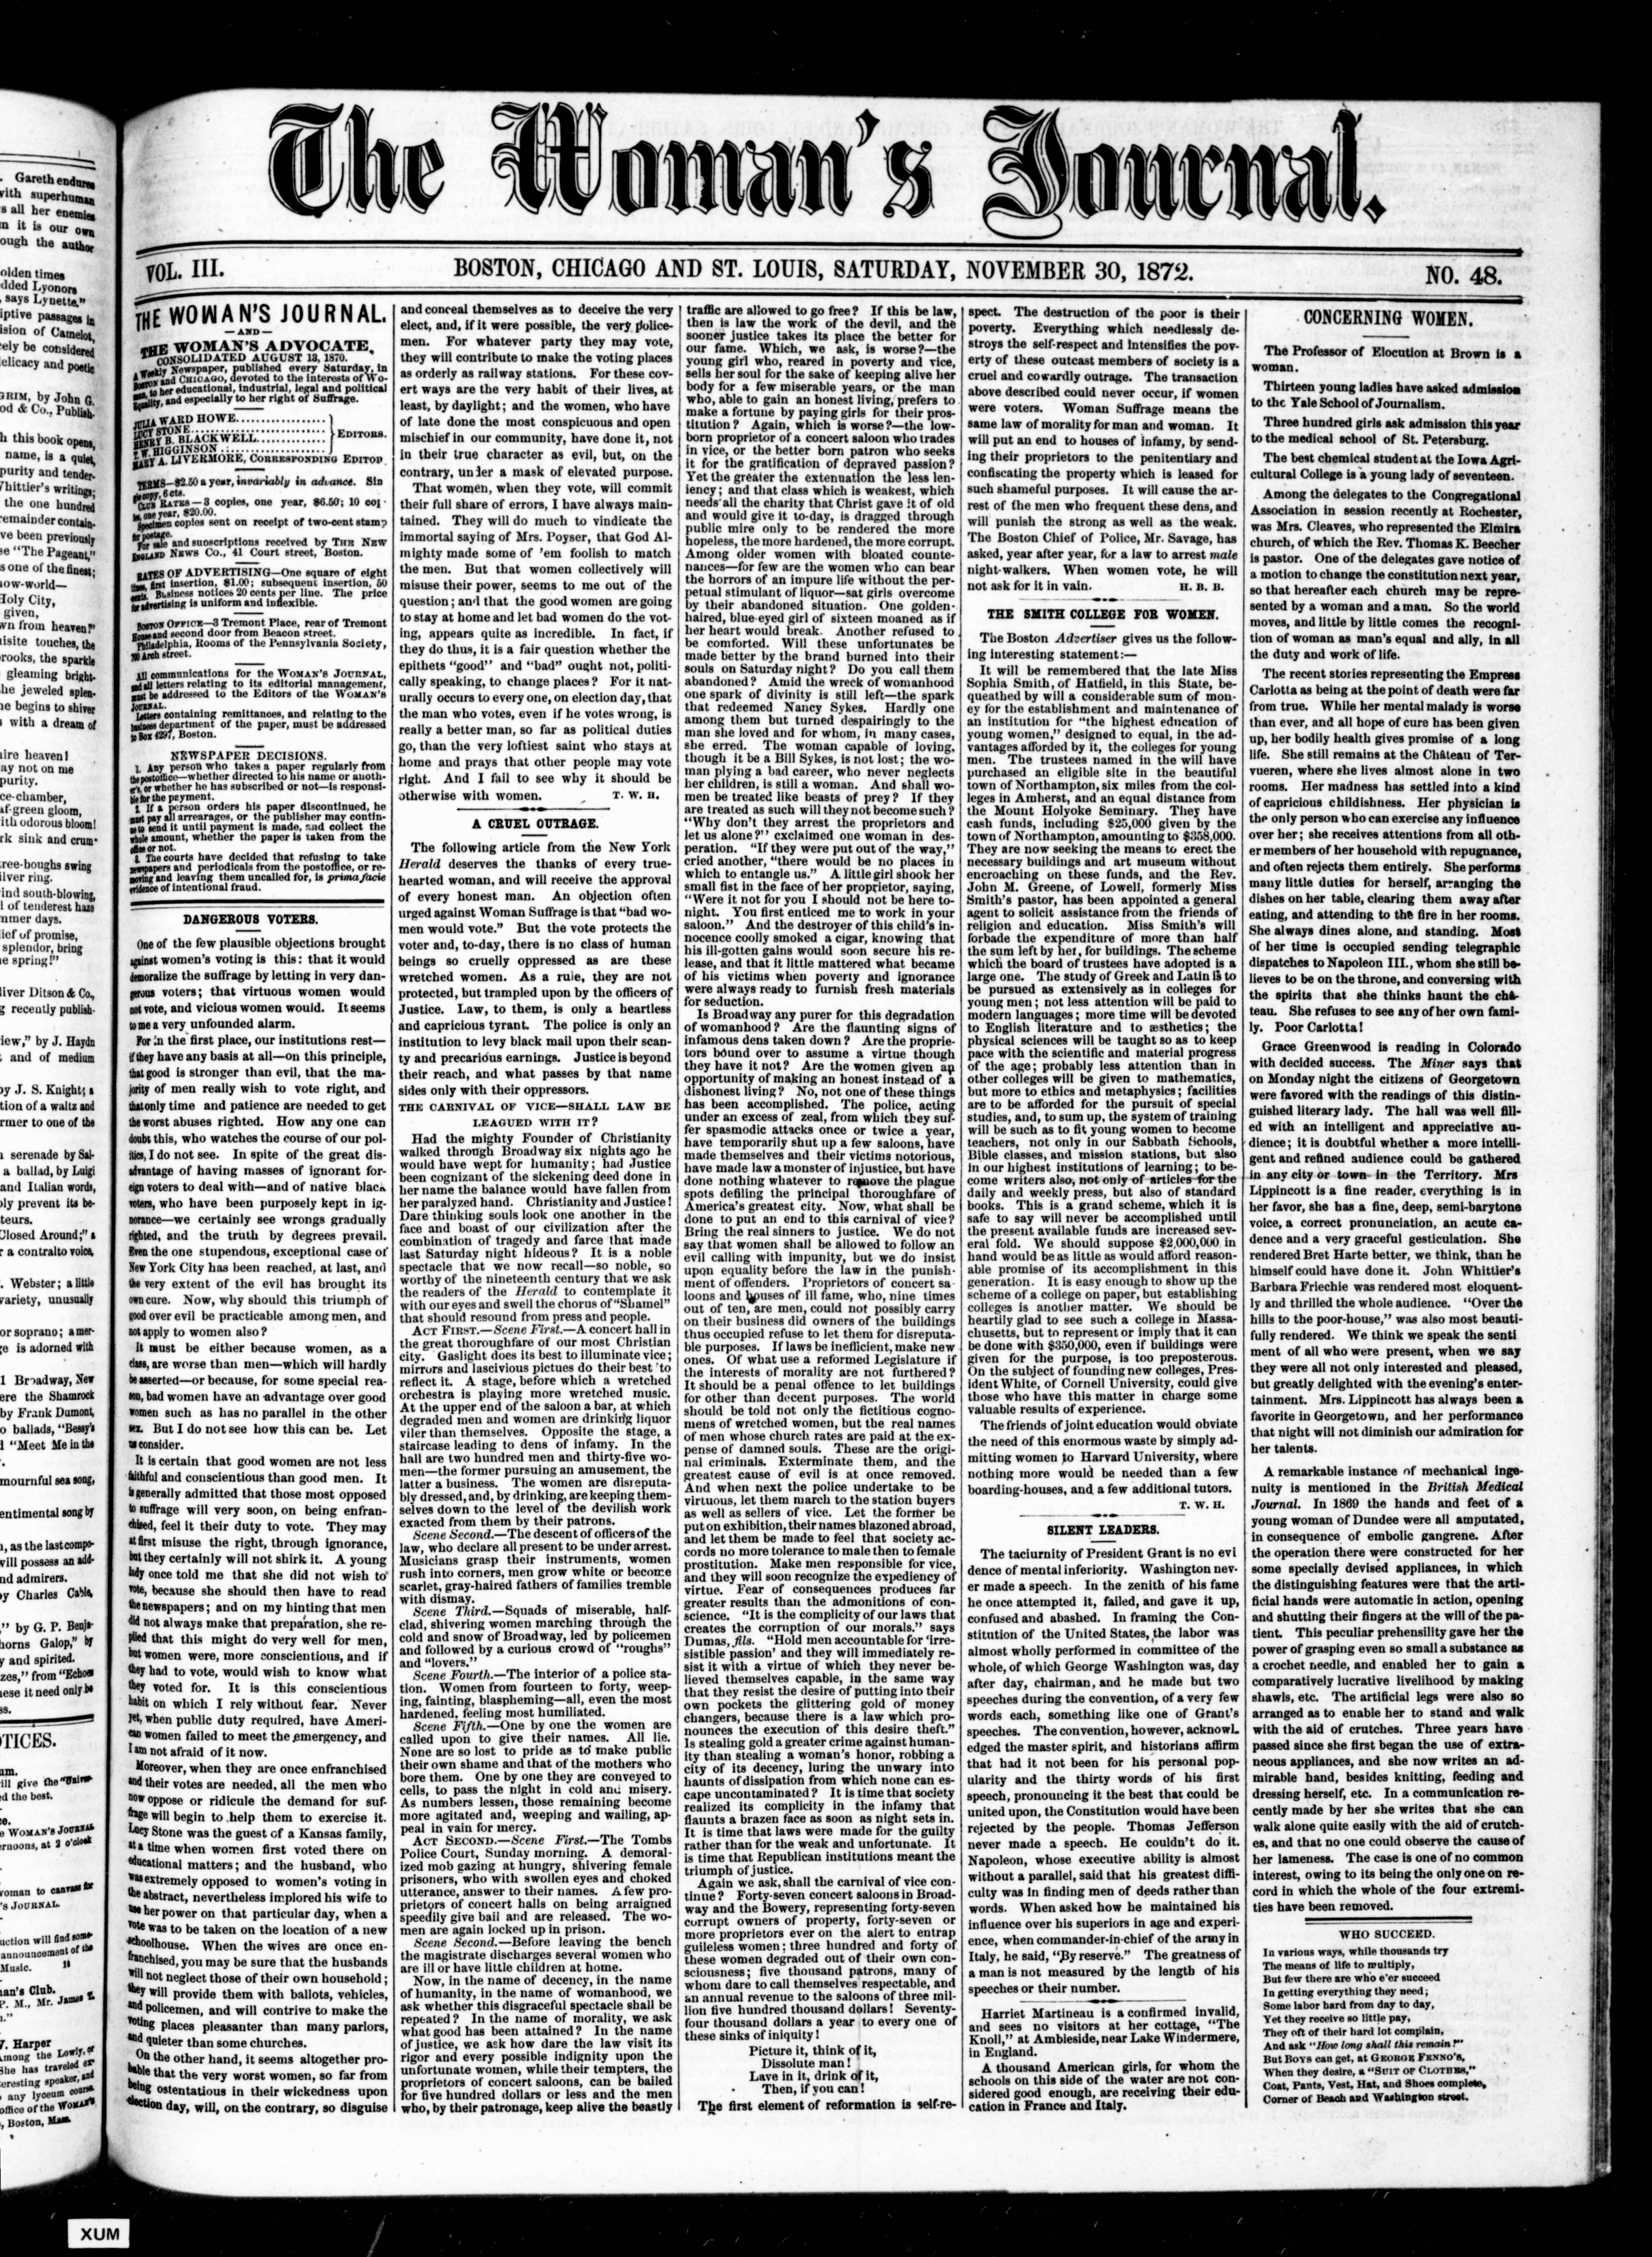 Front Page view of The Woman's Journal. Boston, Chicago and St. Louis from Saturday, November 30, 1872